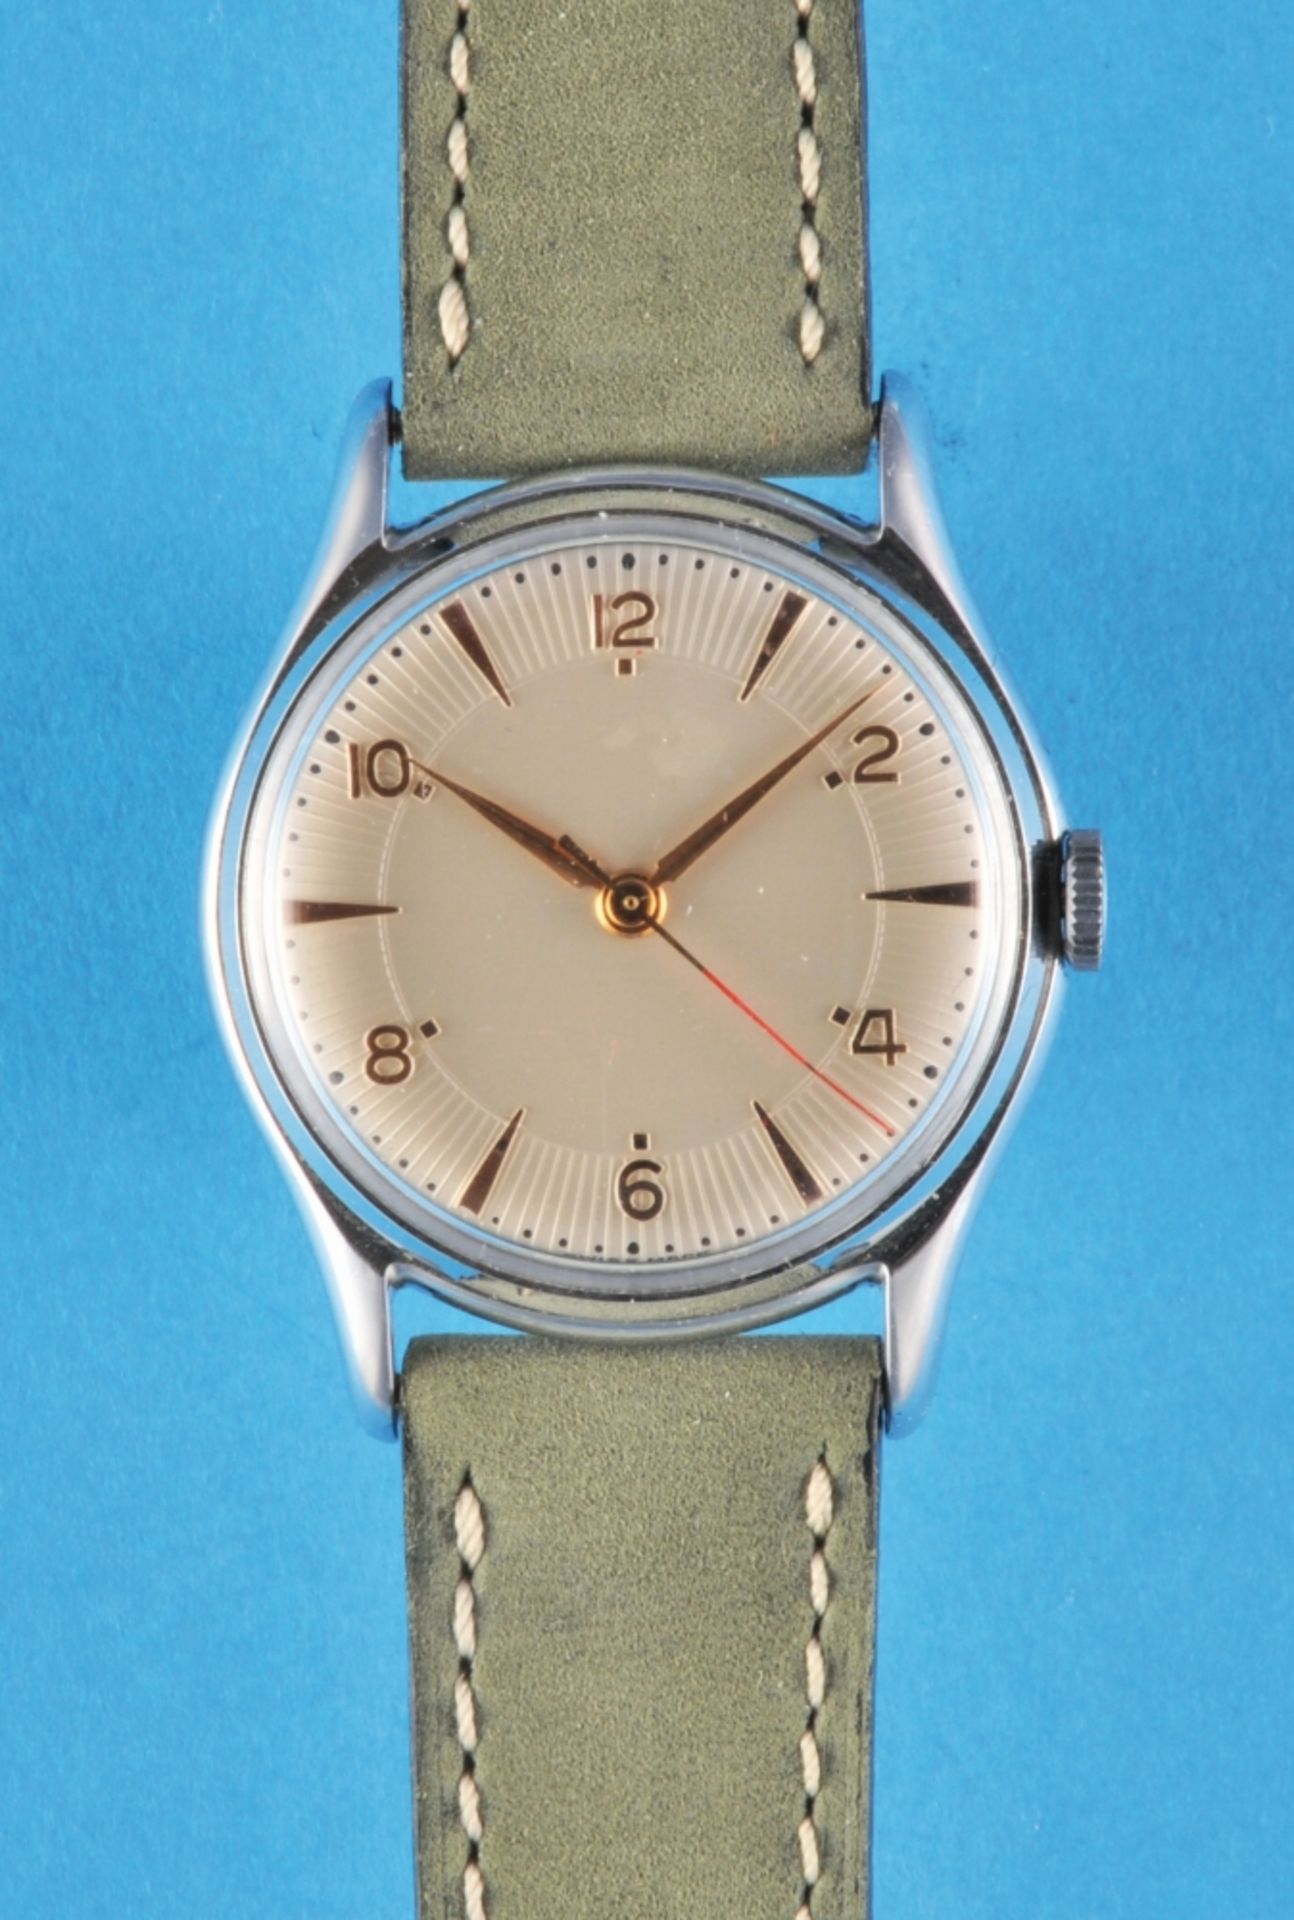 Rare wristwatch with jumping center second